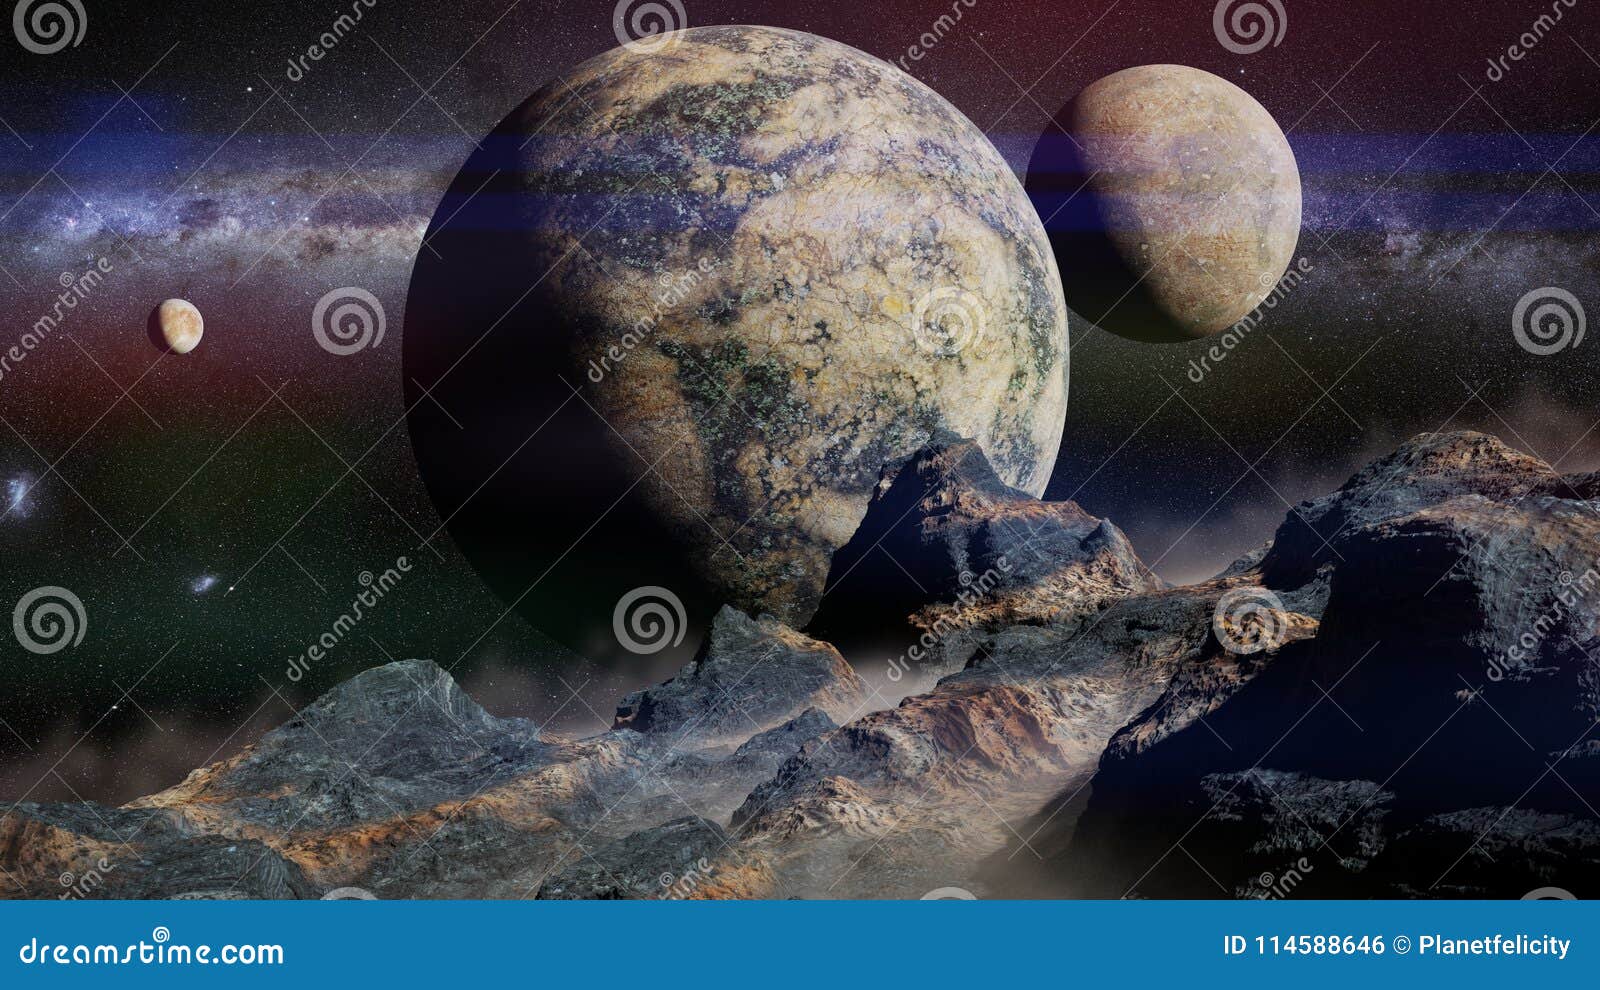 alien landscape with planet, moons and the milky way galaxy